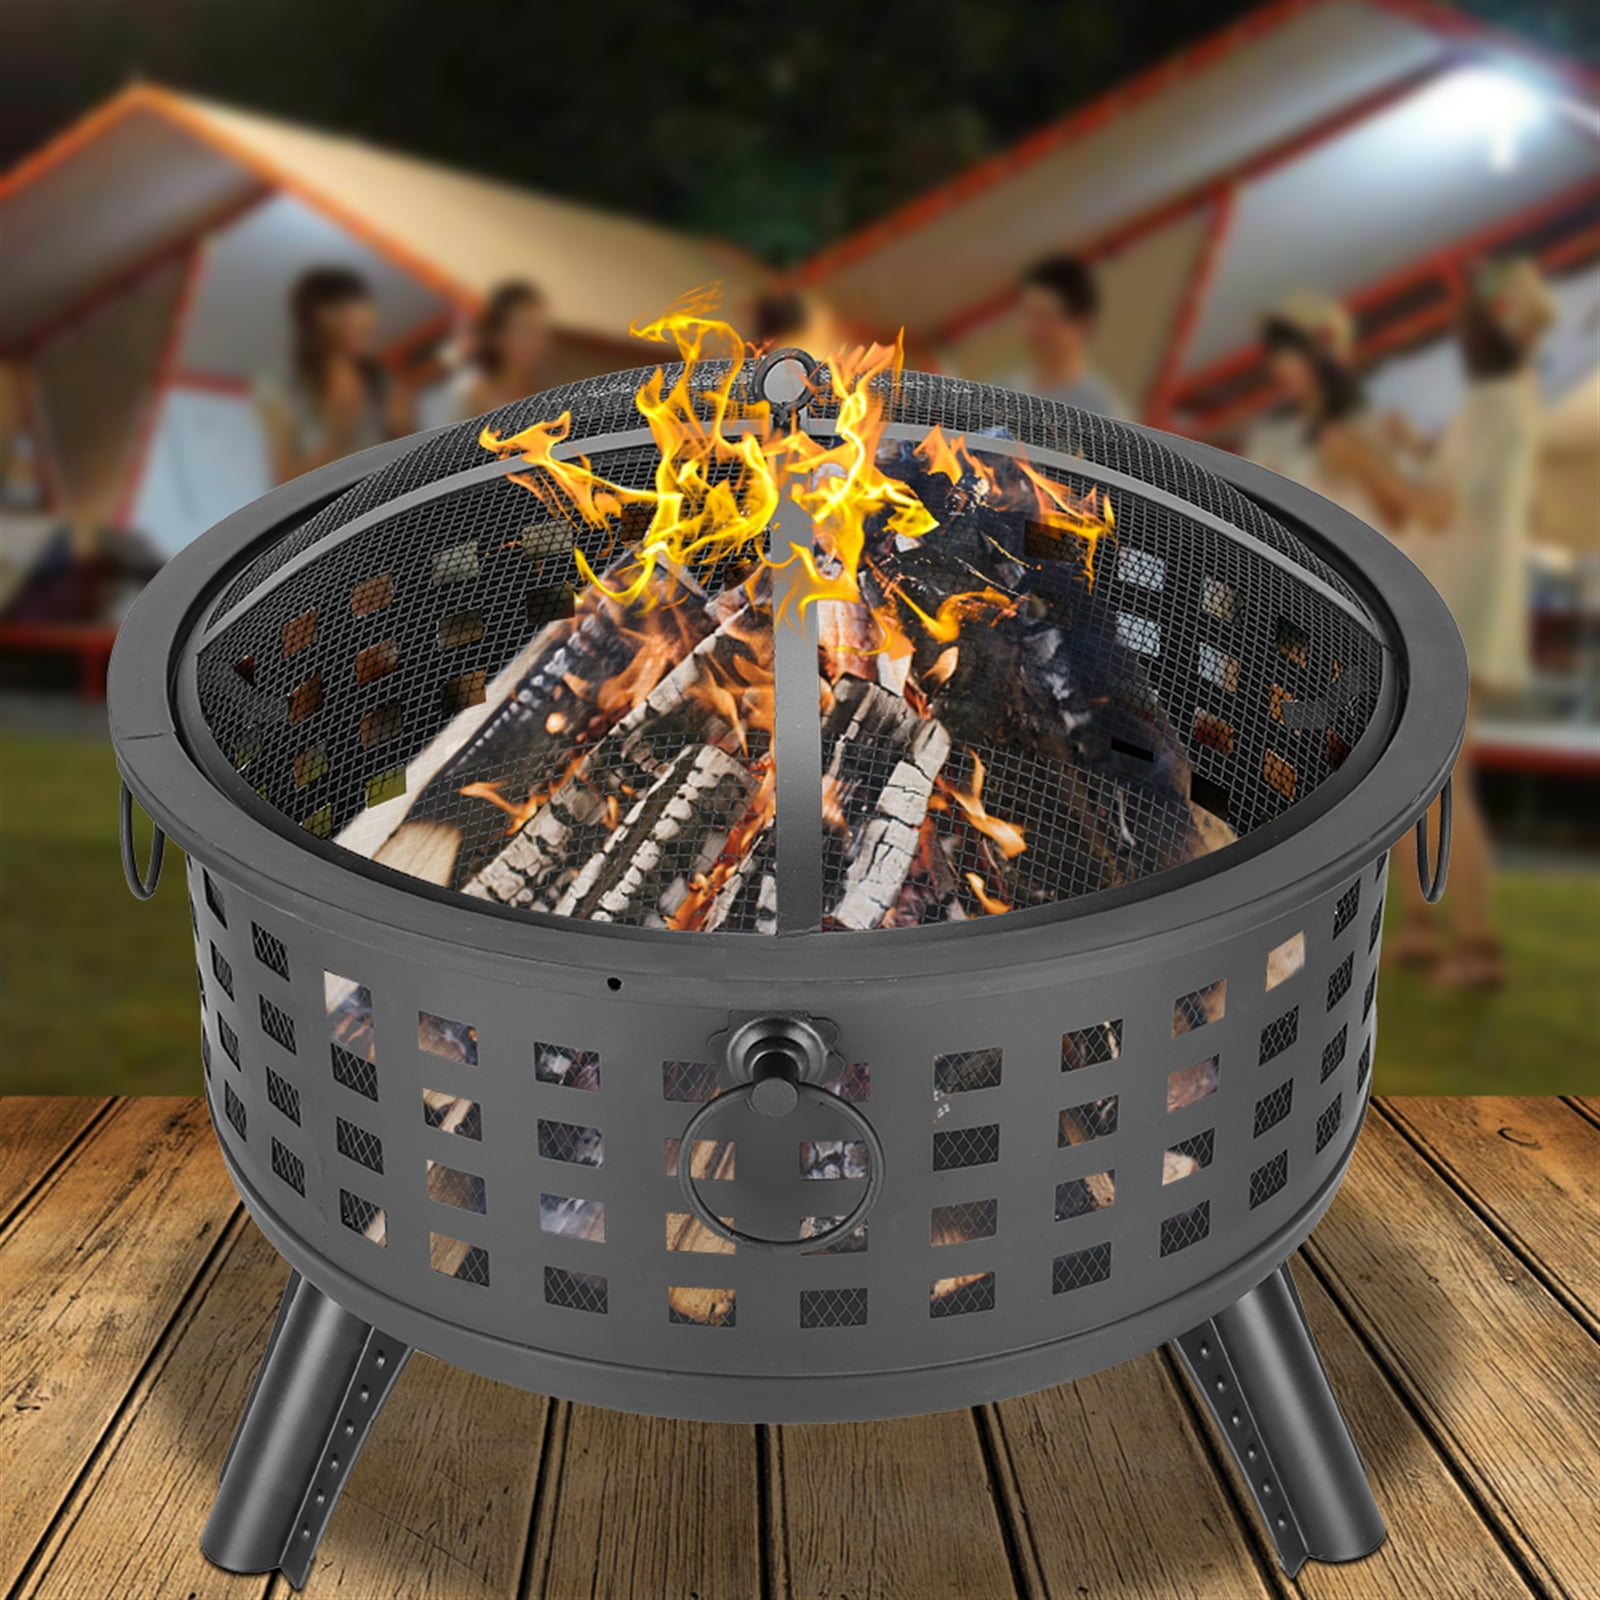 3-in-1 Outdoor Fire Pit, Heavy Duty Metal Fire Pit with Spark Mesh Cover  and Poker, 26 in Outdoor Grill/Ice/Fire Pit, Wood Burning Bonfire Bowl Pit,  for Backyard, Patio, Party, BBQ, Black, D2845 